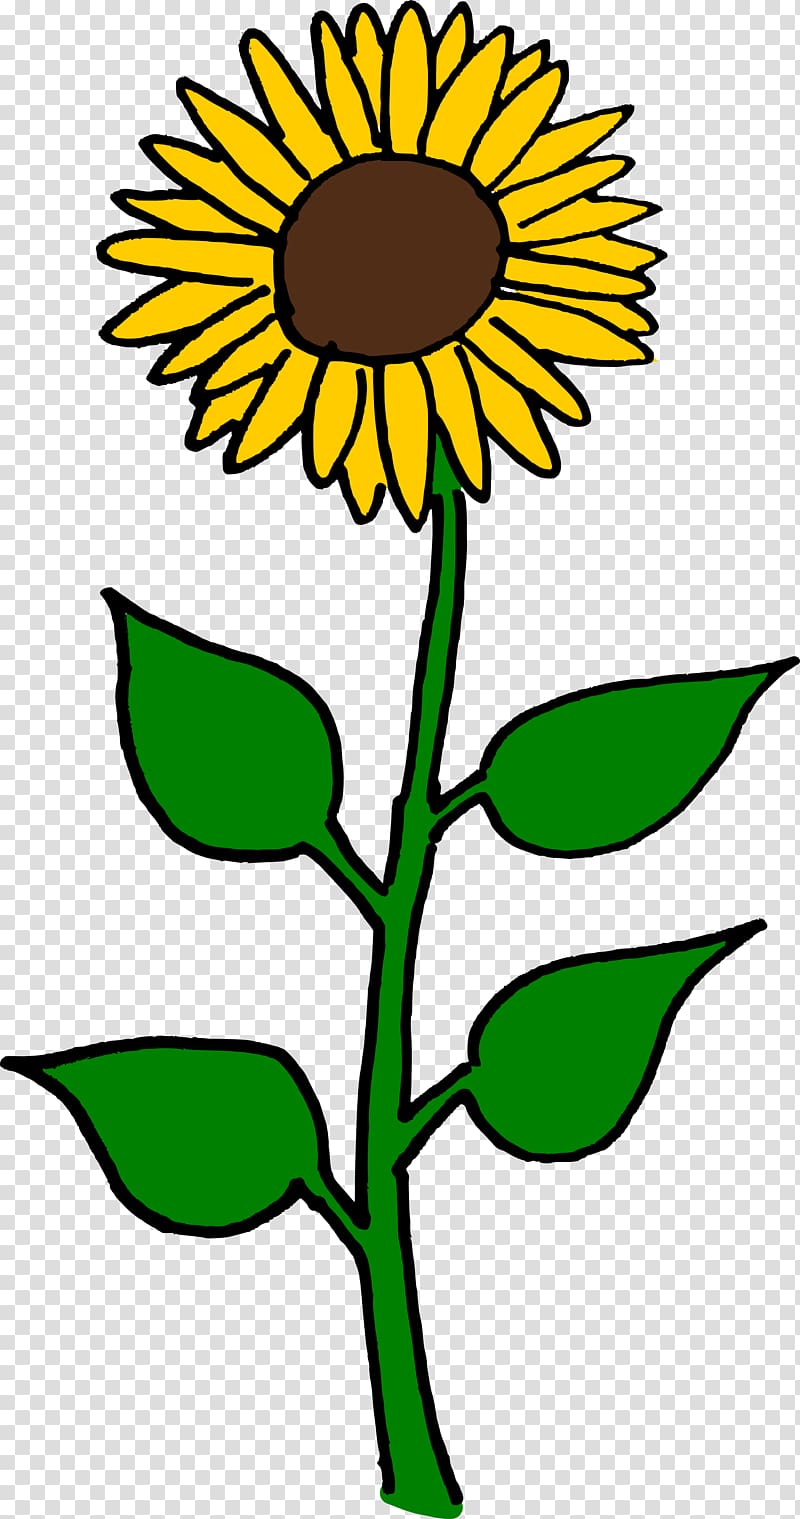 Common sunflower Sunflower seed Helianthus giganteus , sunflowers transparent background PNG clipart